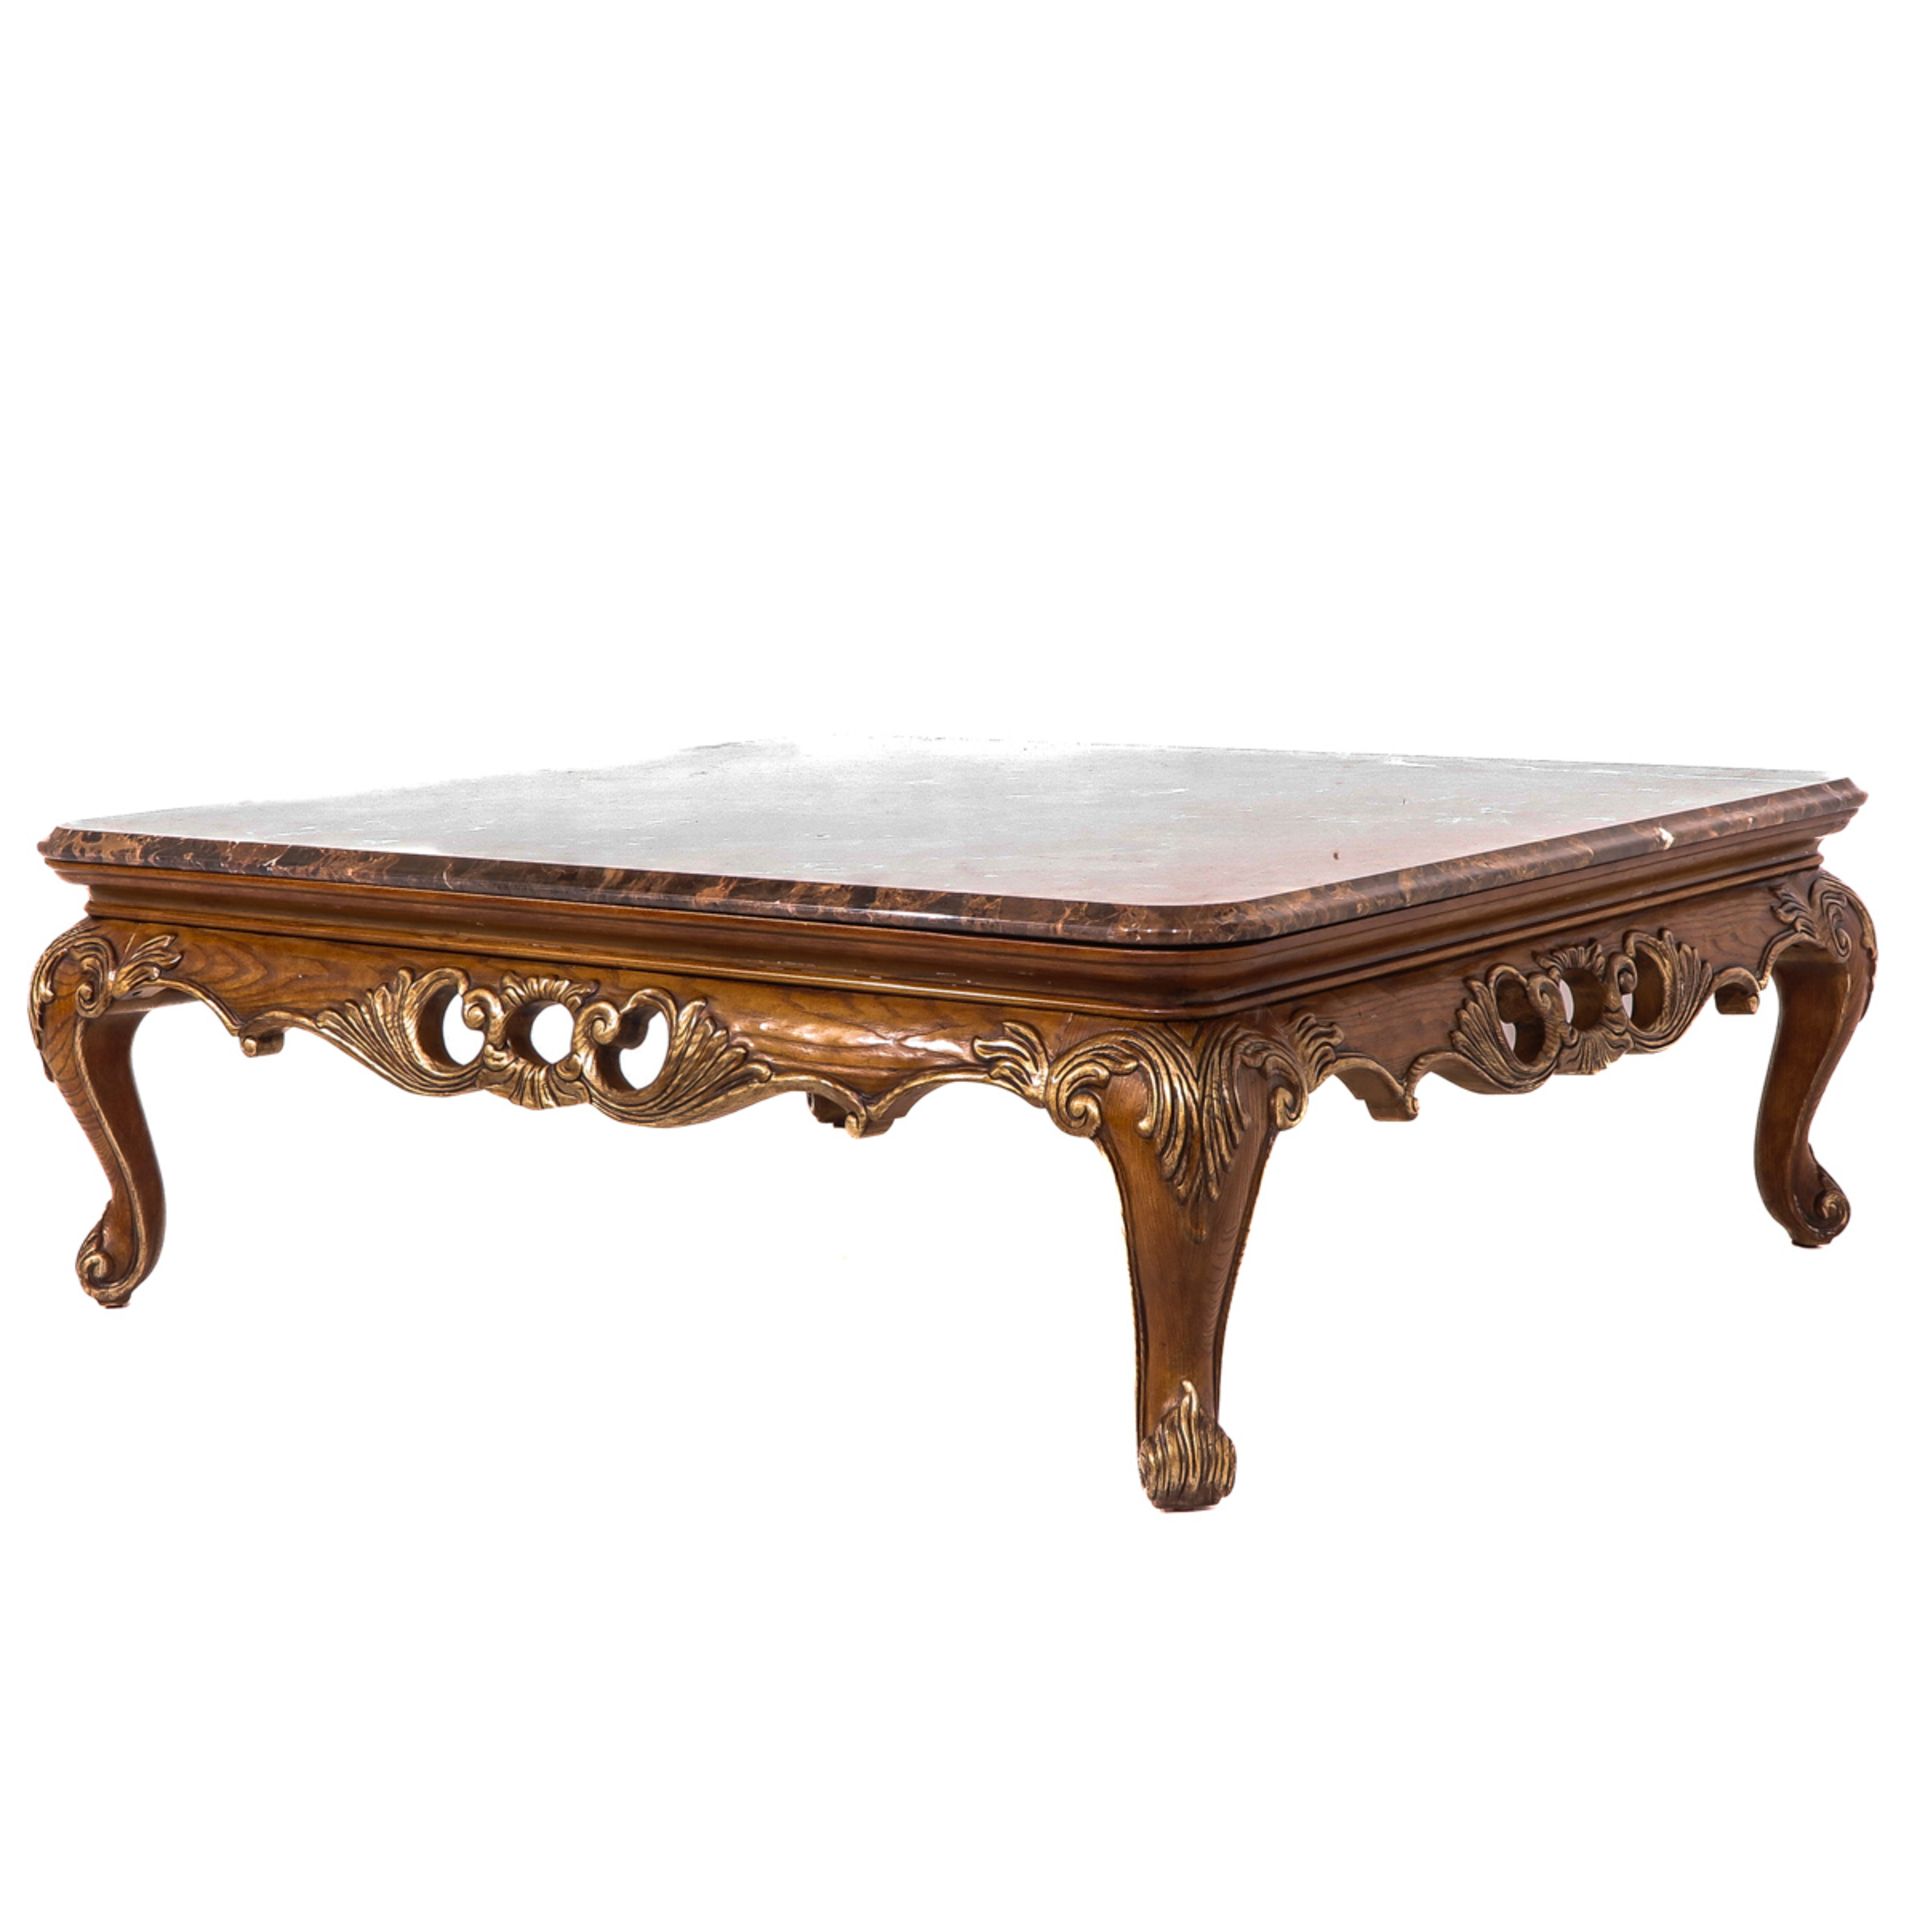 A Marble Top Coffee table - Image 3 of 8